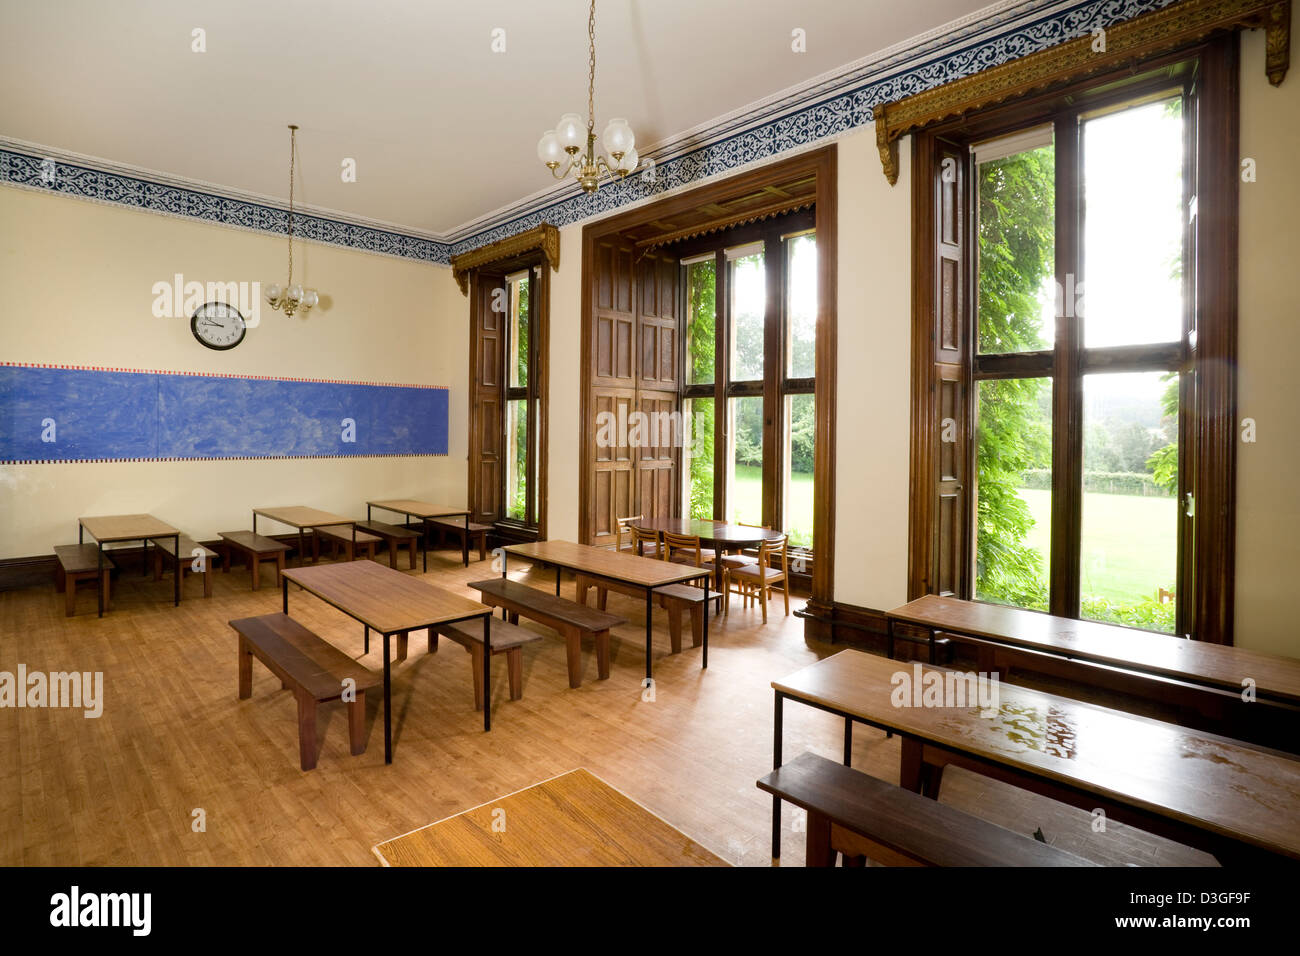 Former classrooms in a redundant private school building. Stock Photo